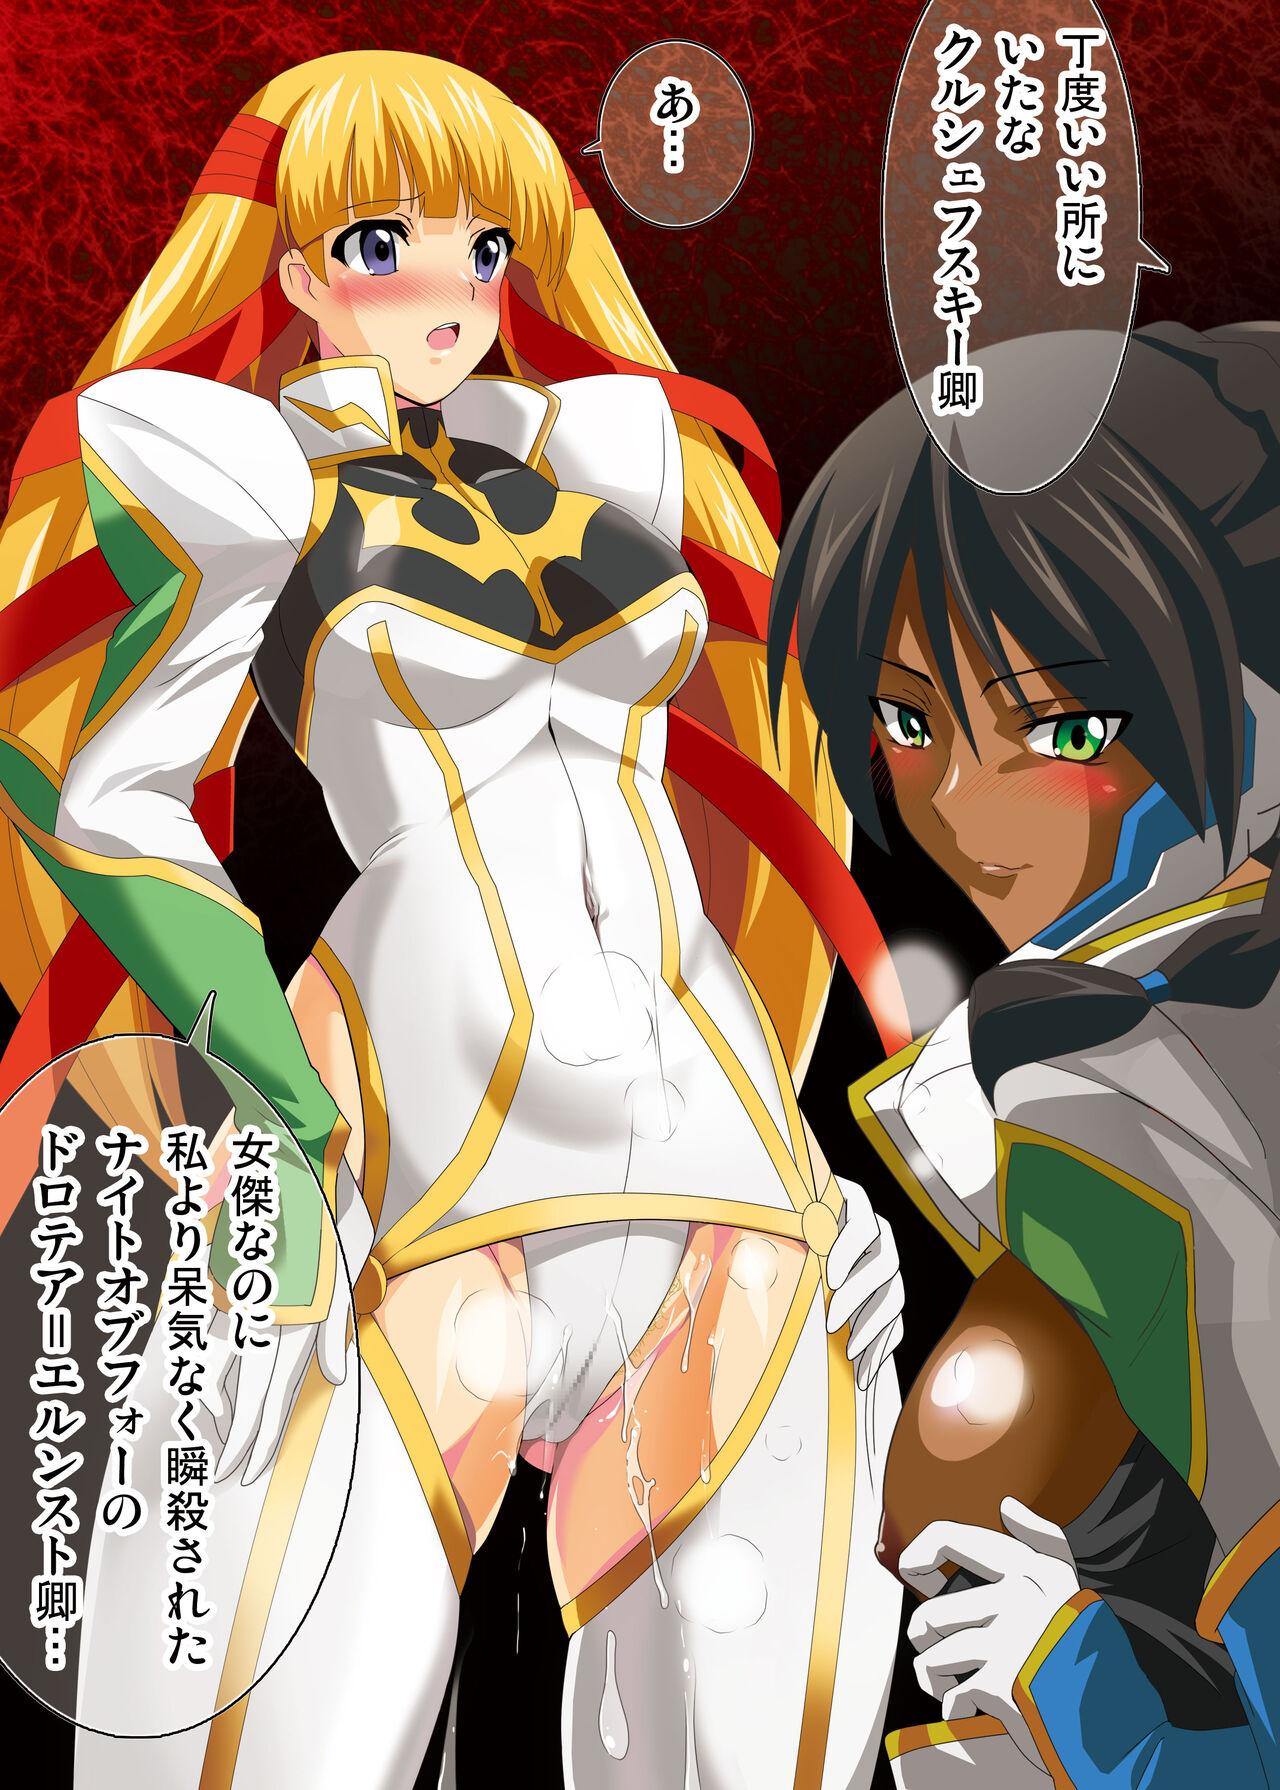 [Lezmoe! (Oyu no Kaori)]   [Brainwashing] Geass heroines completely corrupted by Empress Marianne [Evil fall] ~Knights, princesses, soldiers, and witches fall! (CODE GEASS: Lelouch of the Rebellion) 145